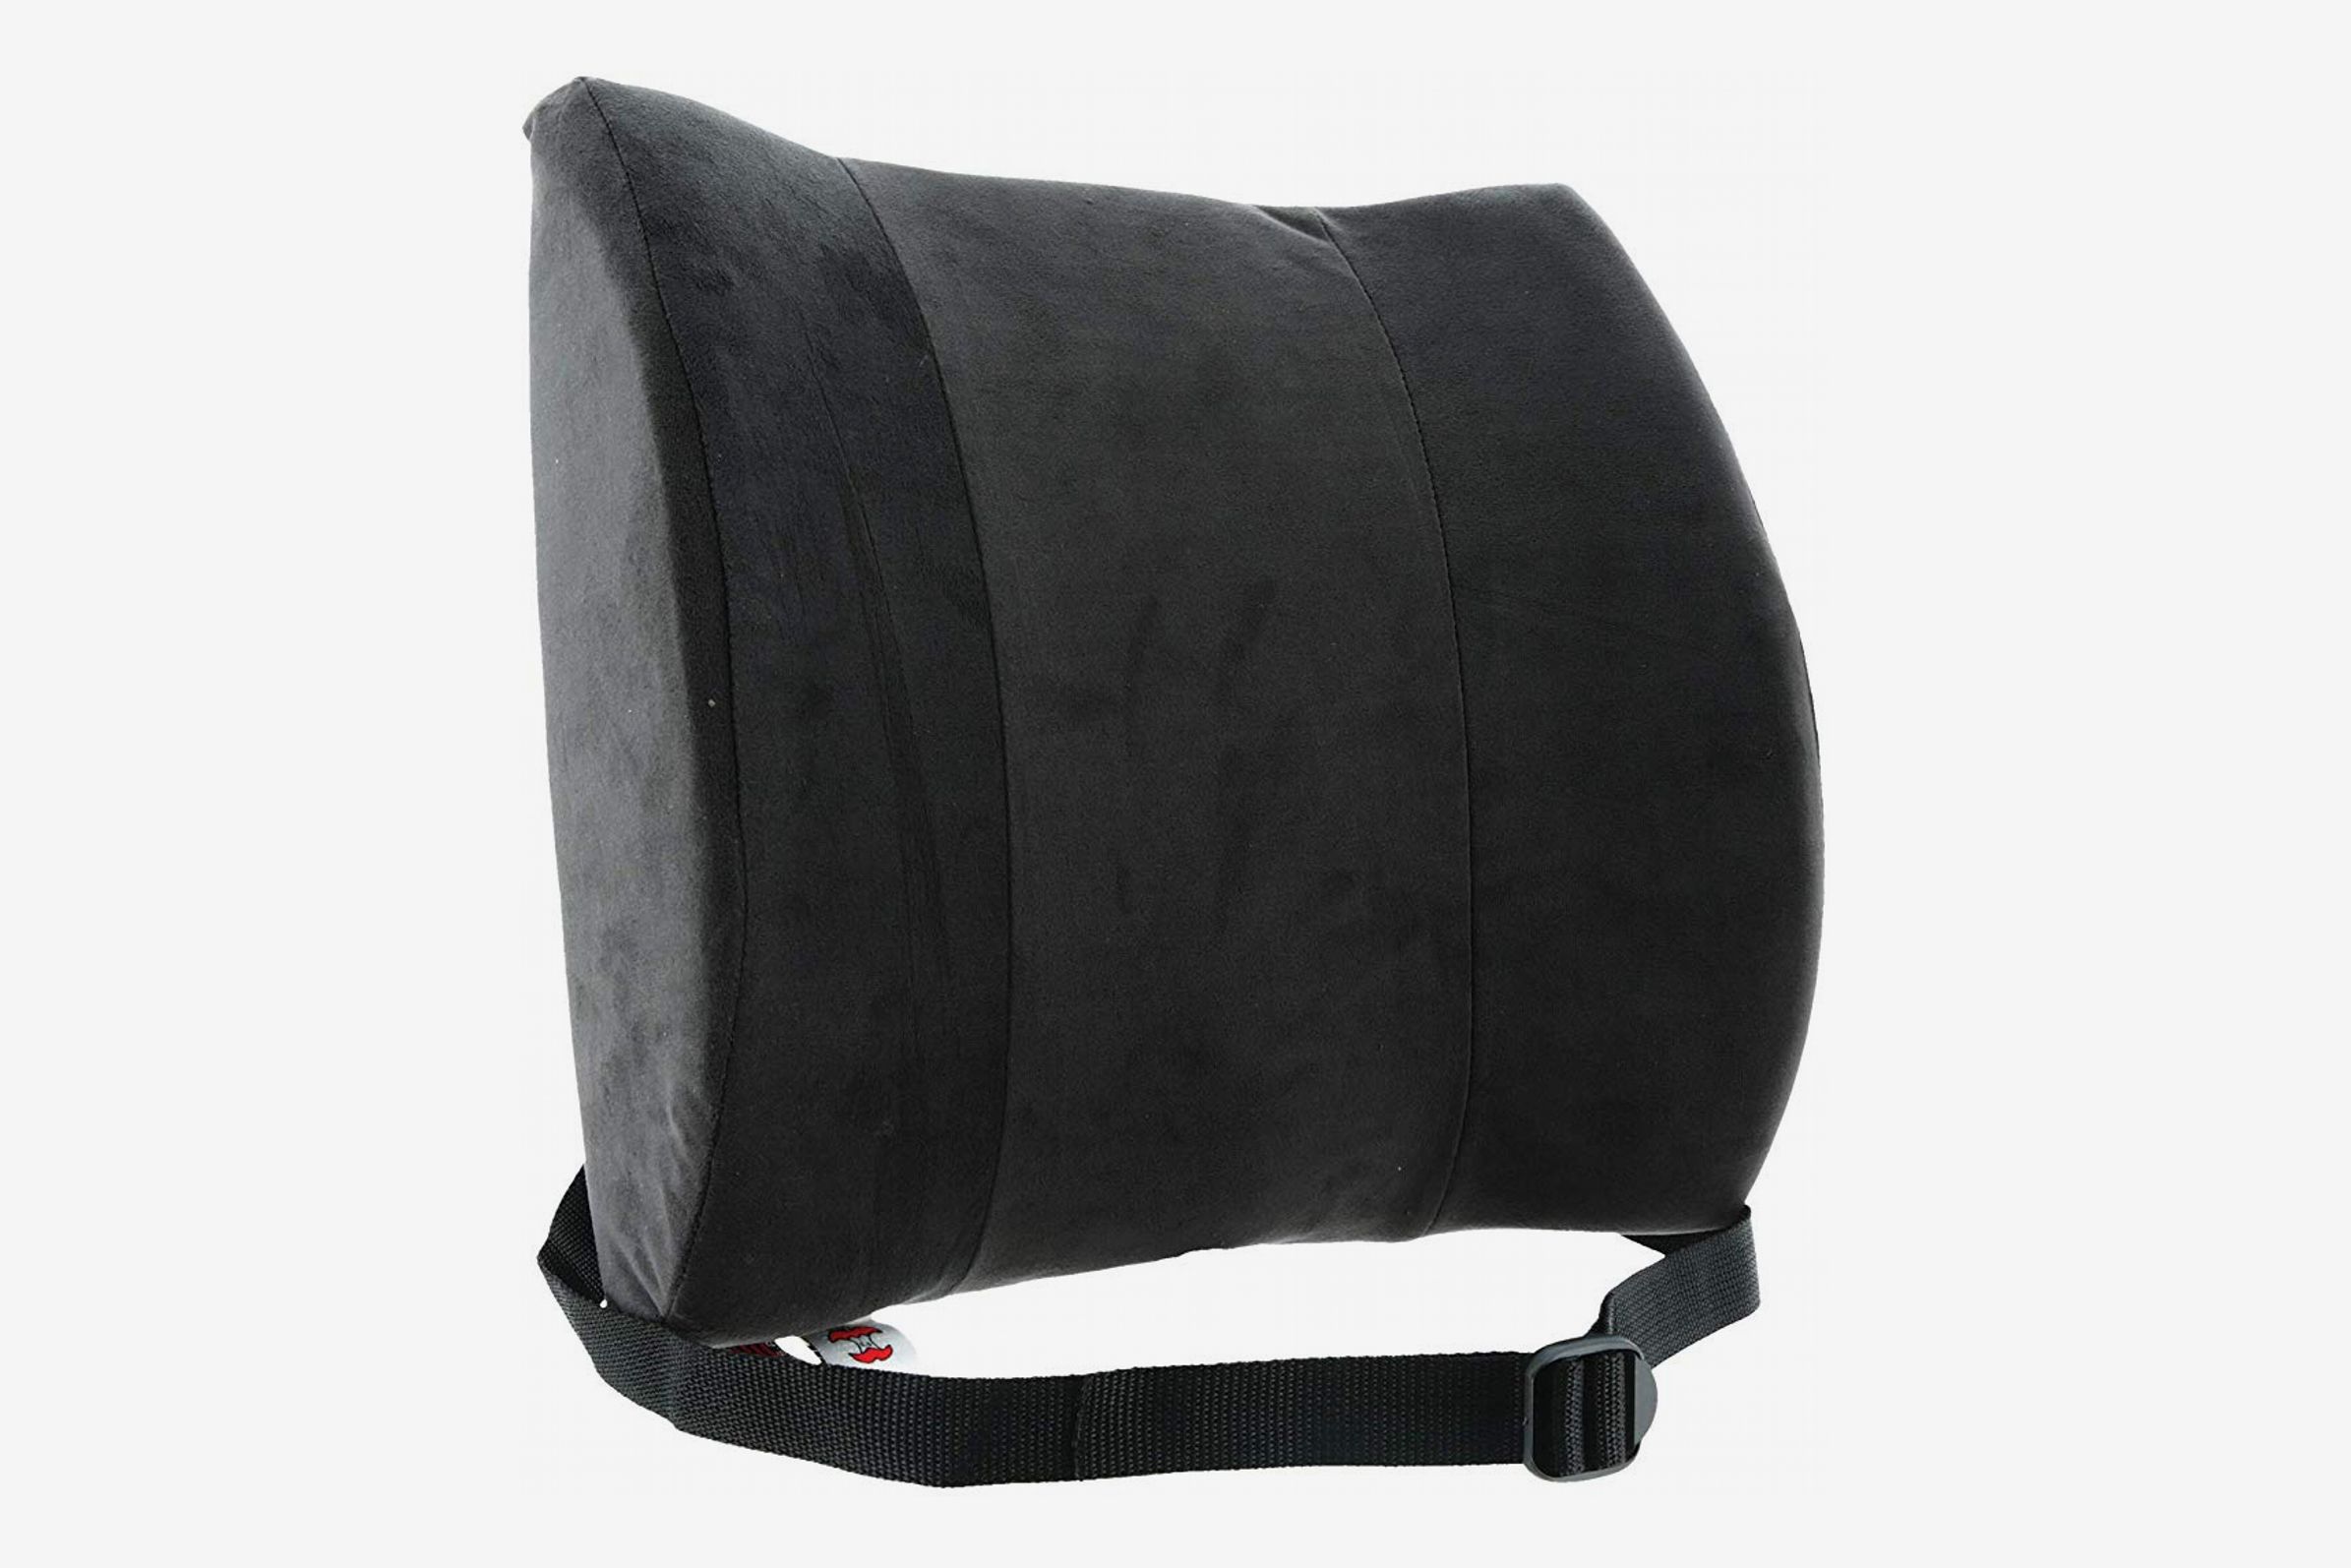 Back Support Cushion For Sofas Our Top 3 - Sittingwell